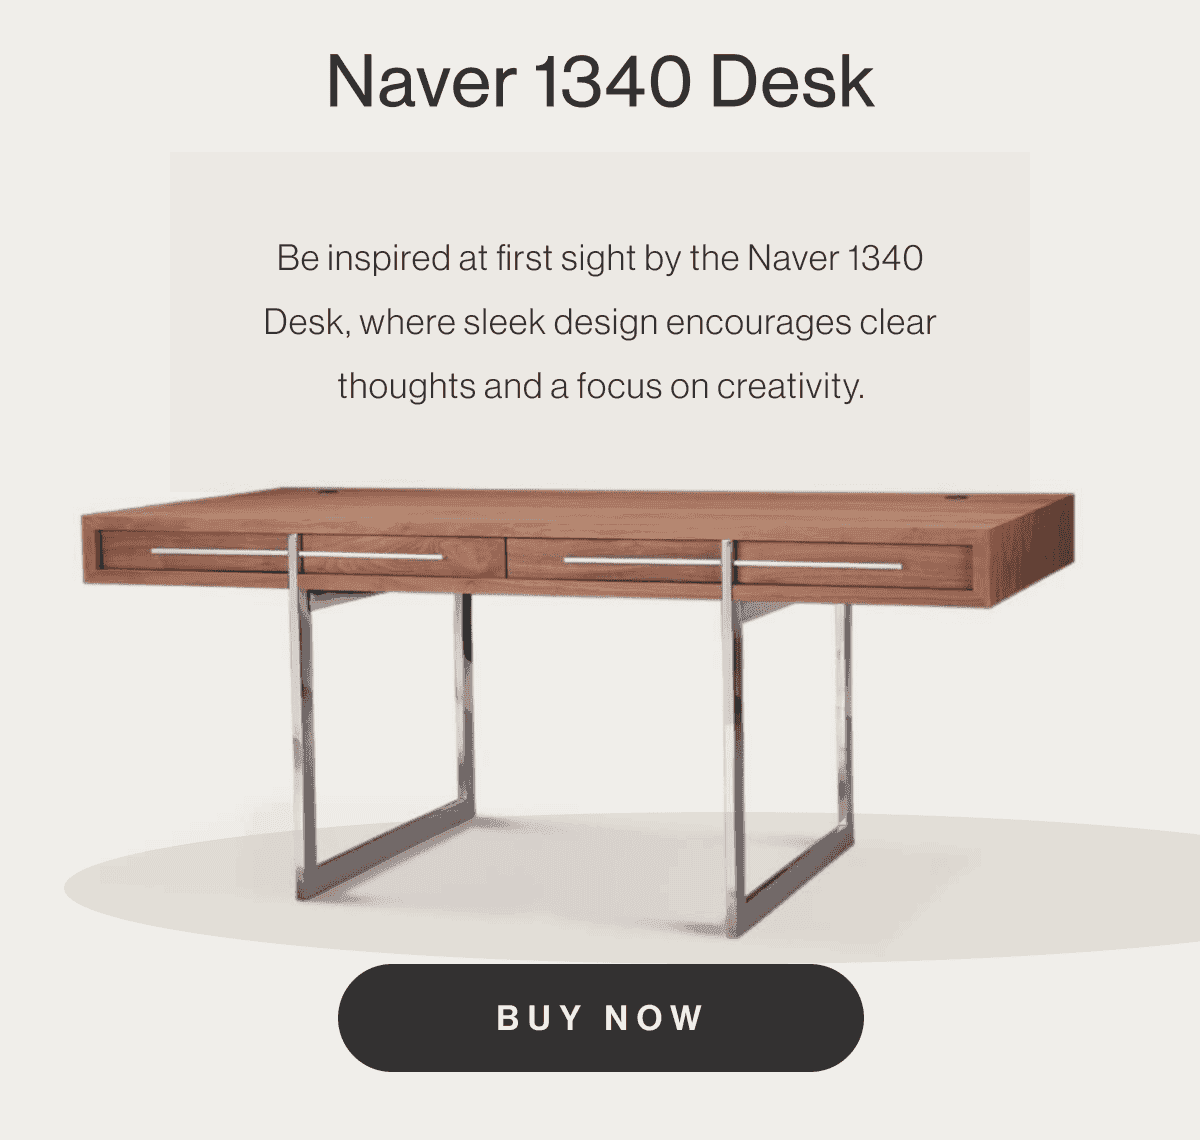 Naver 1340 Desk - Be inspired at first sight by the Naver 1340 Desk, where sleek design encourages clear thoughts and a focus on creativity. - Buy Now